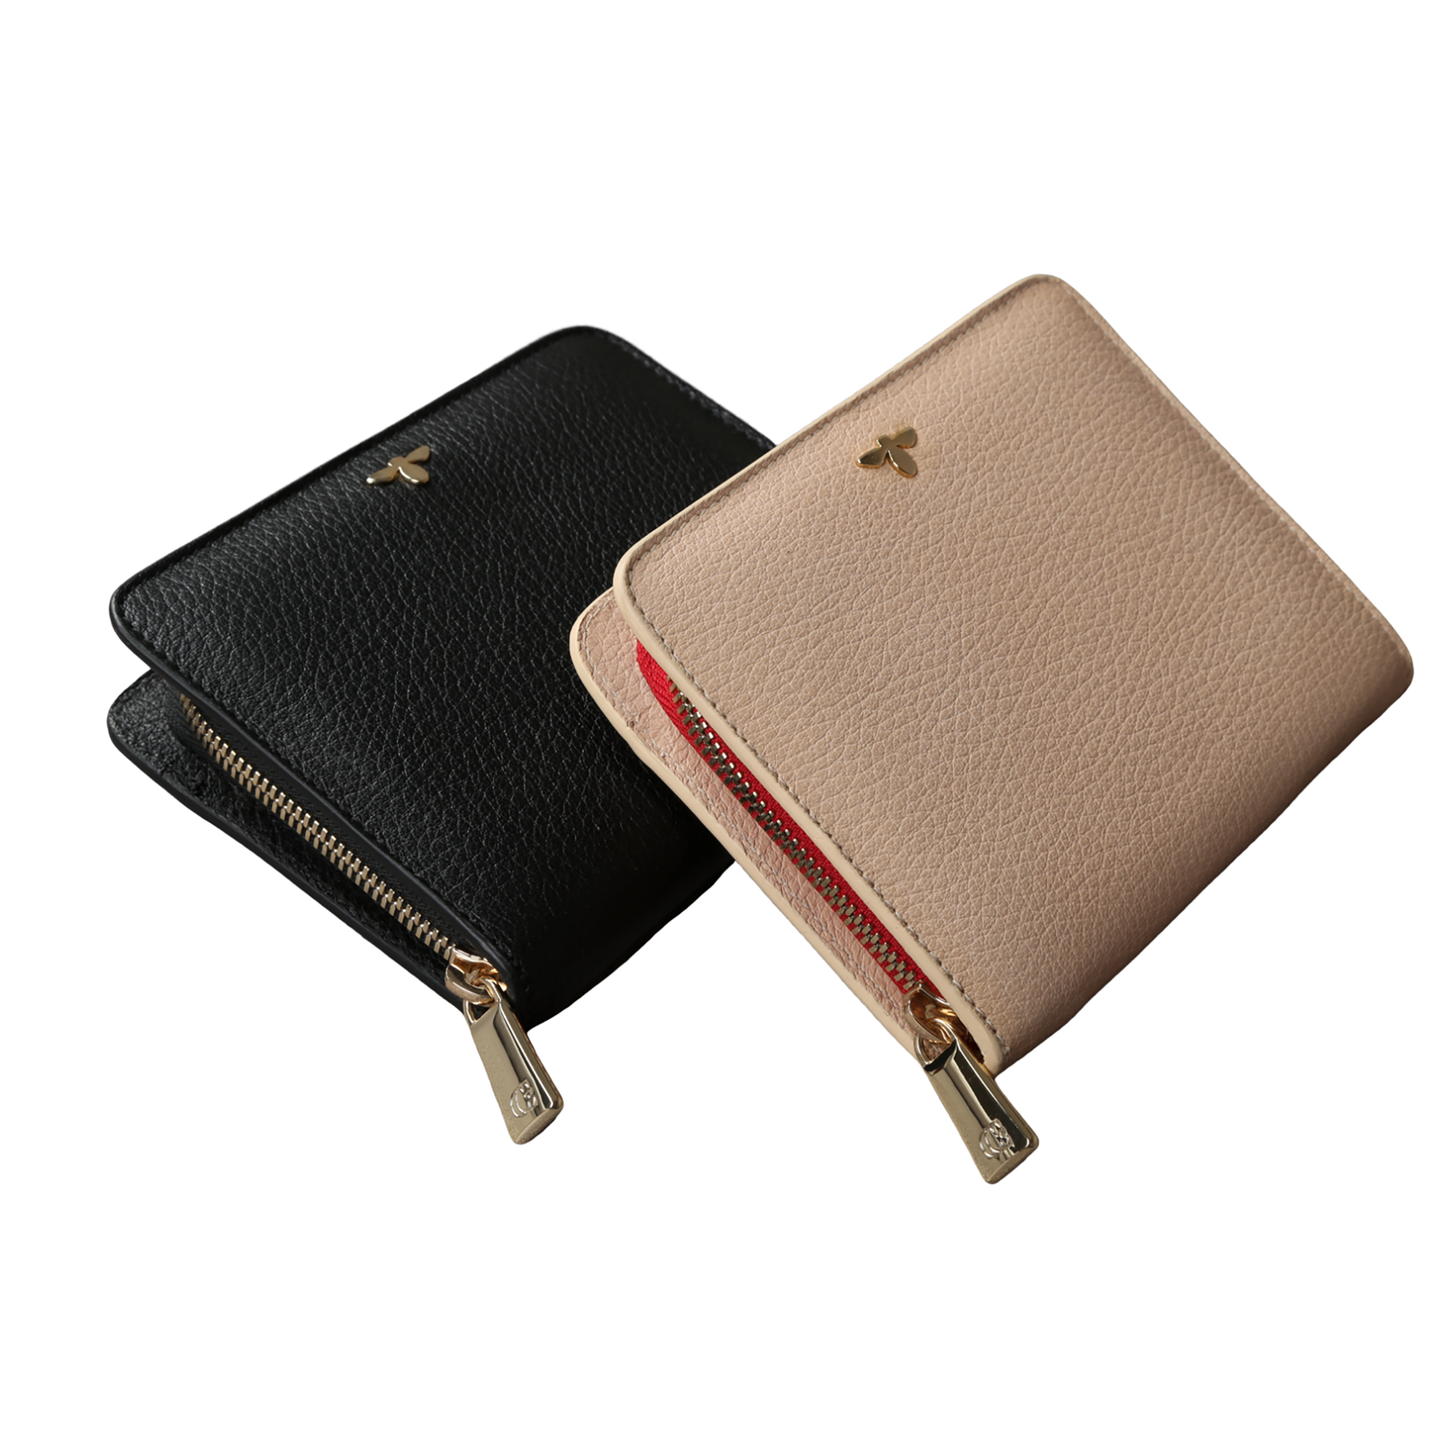 Compact Wallet - Nude-Cecily Clune